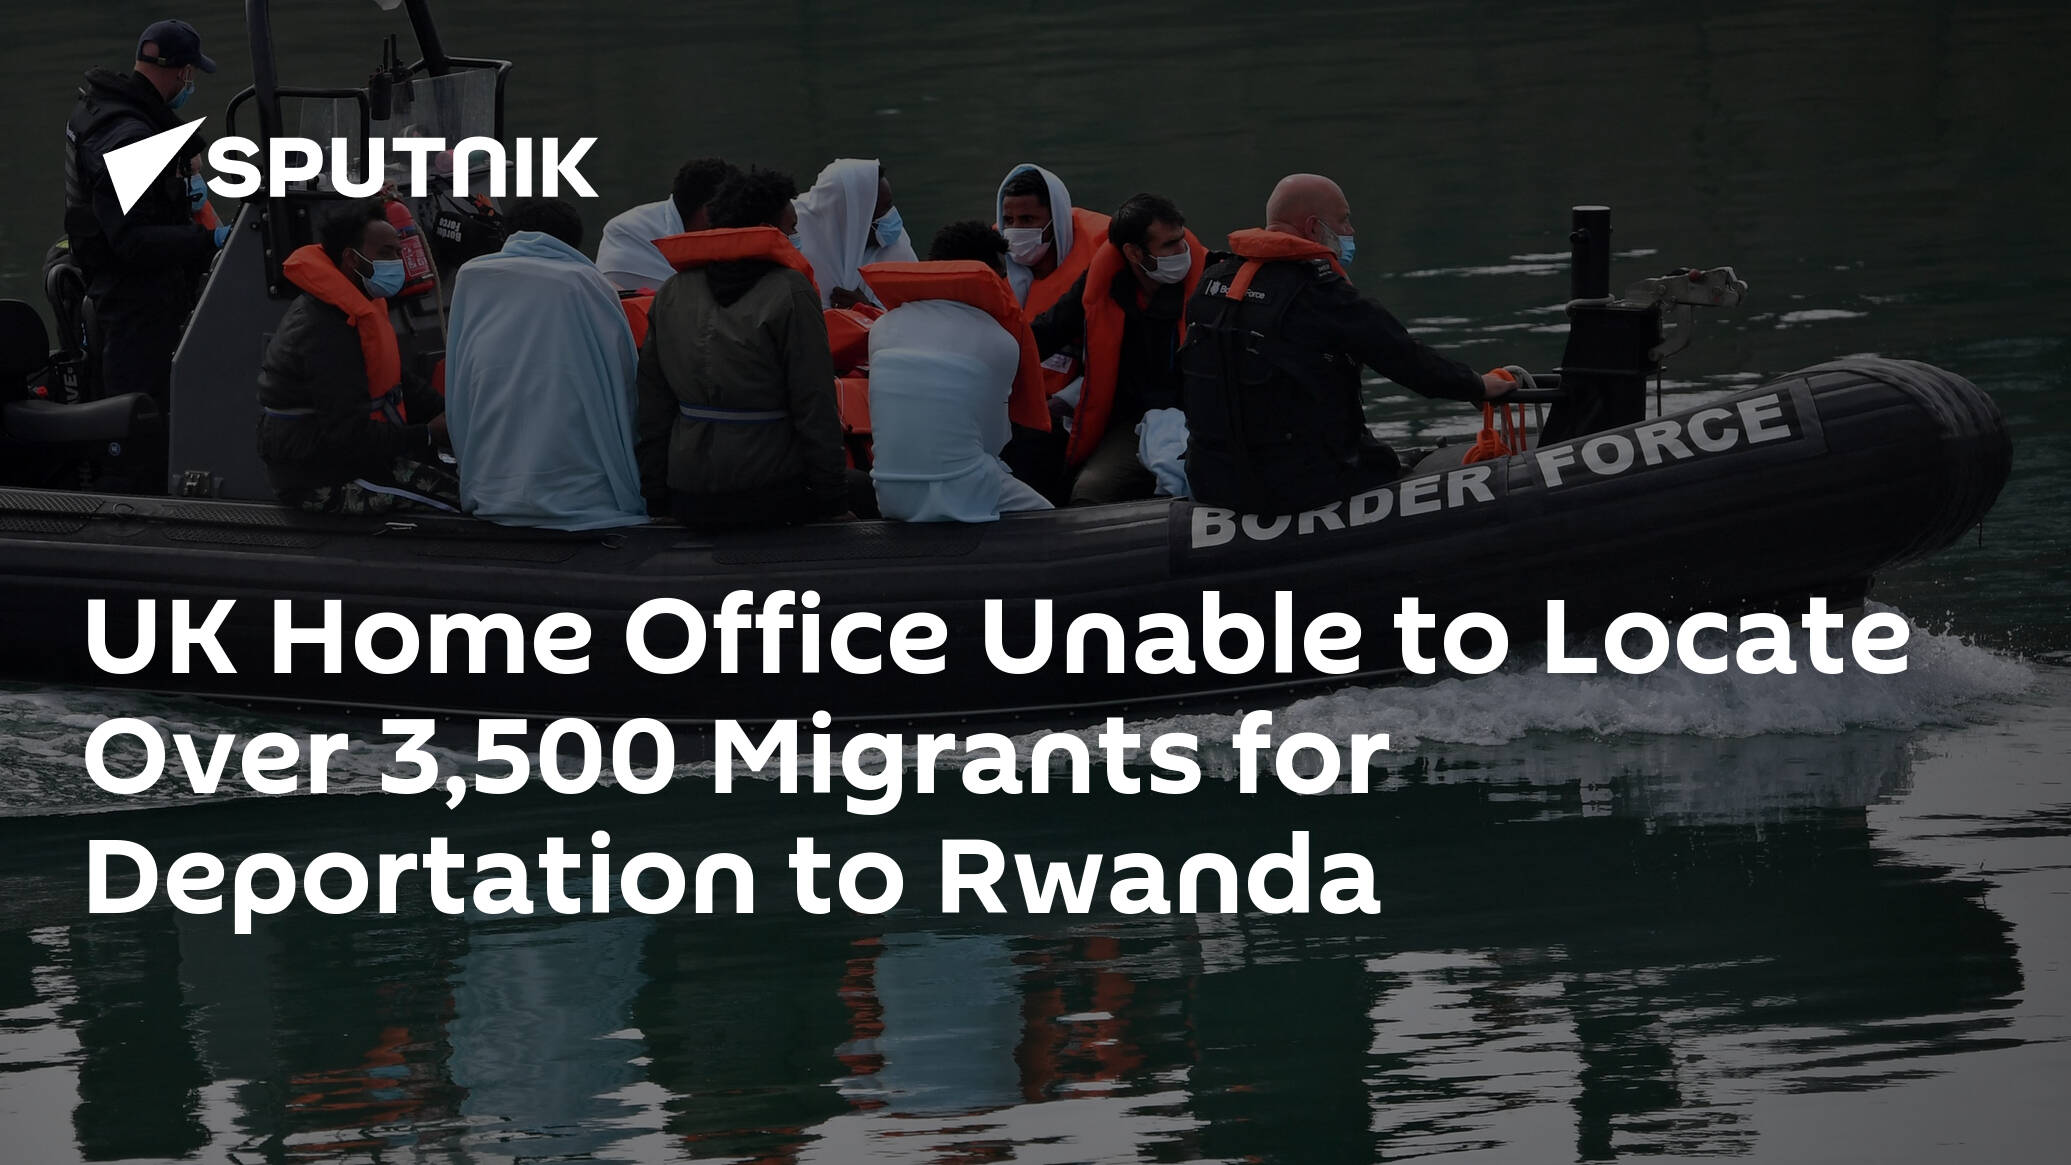 UK Home Office Unable to Locate Over 3,500 Migrants for Deportation to Rwanda